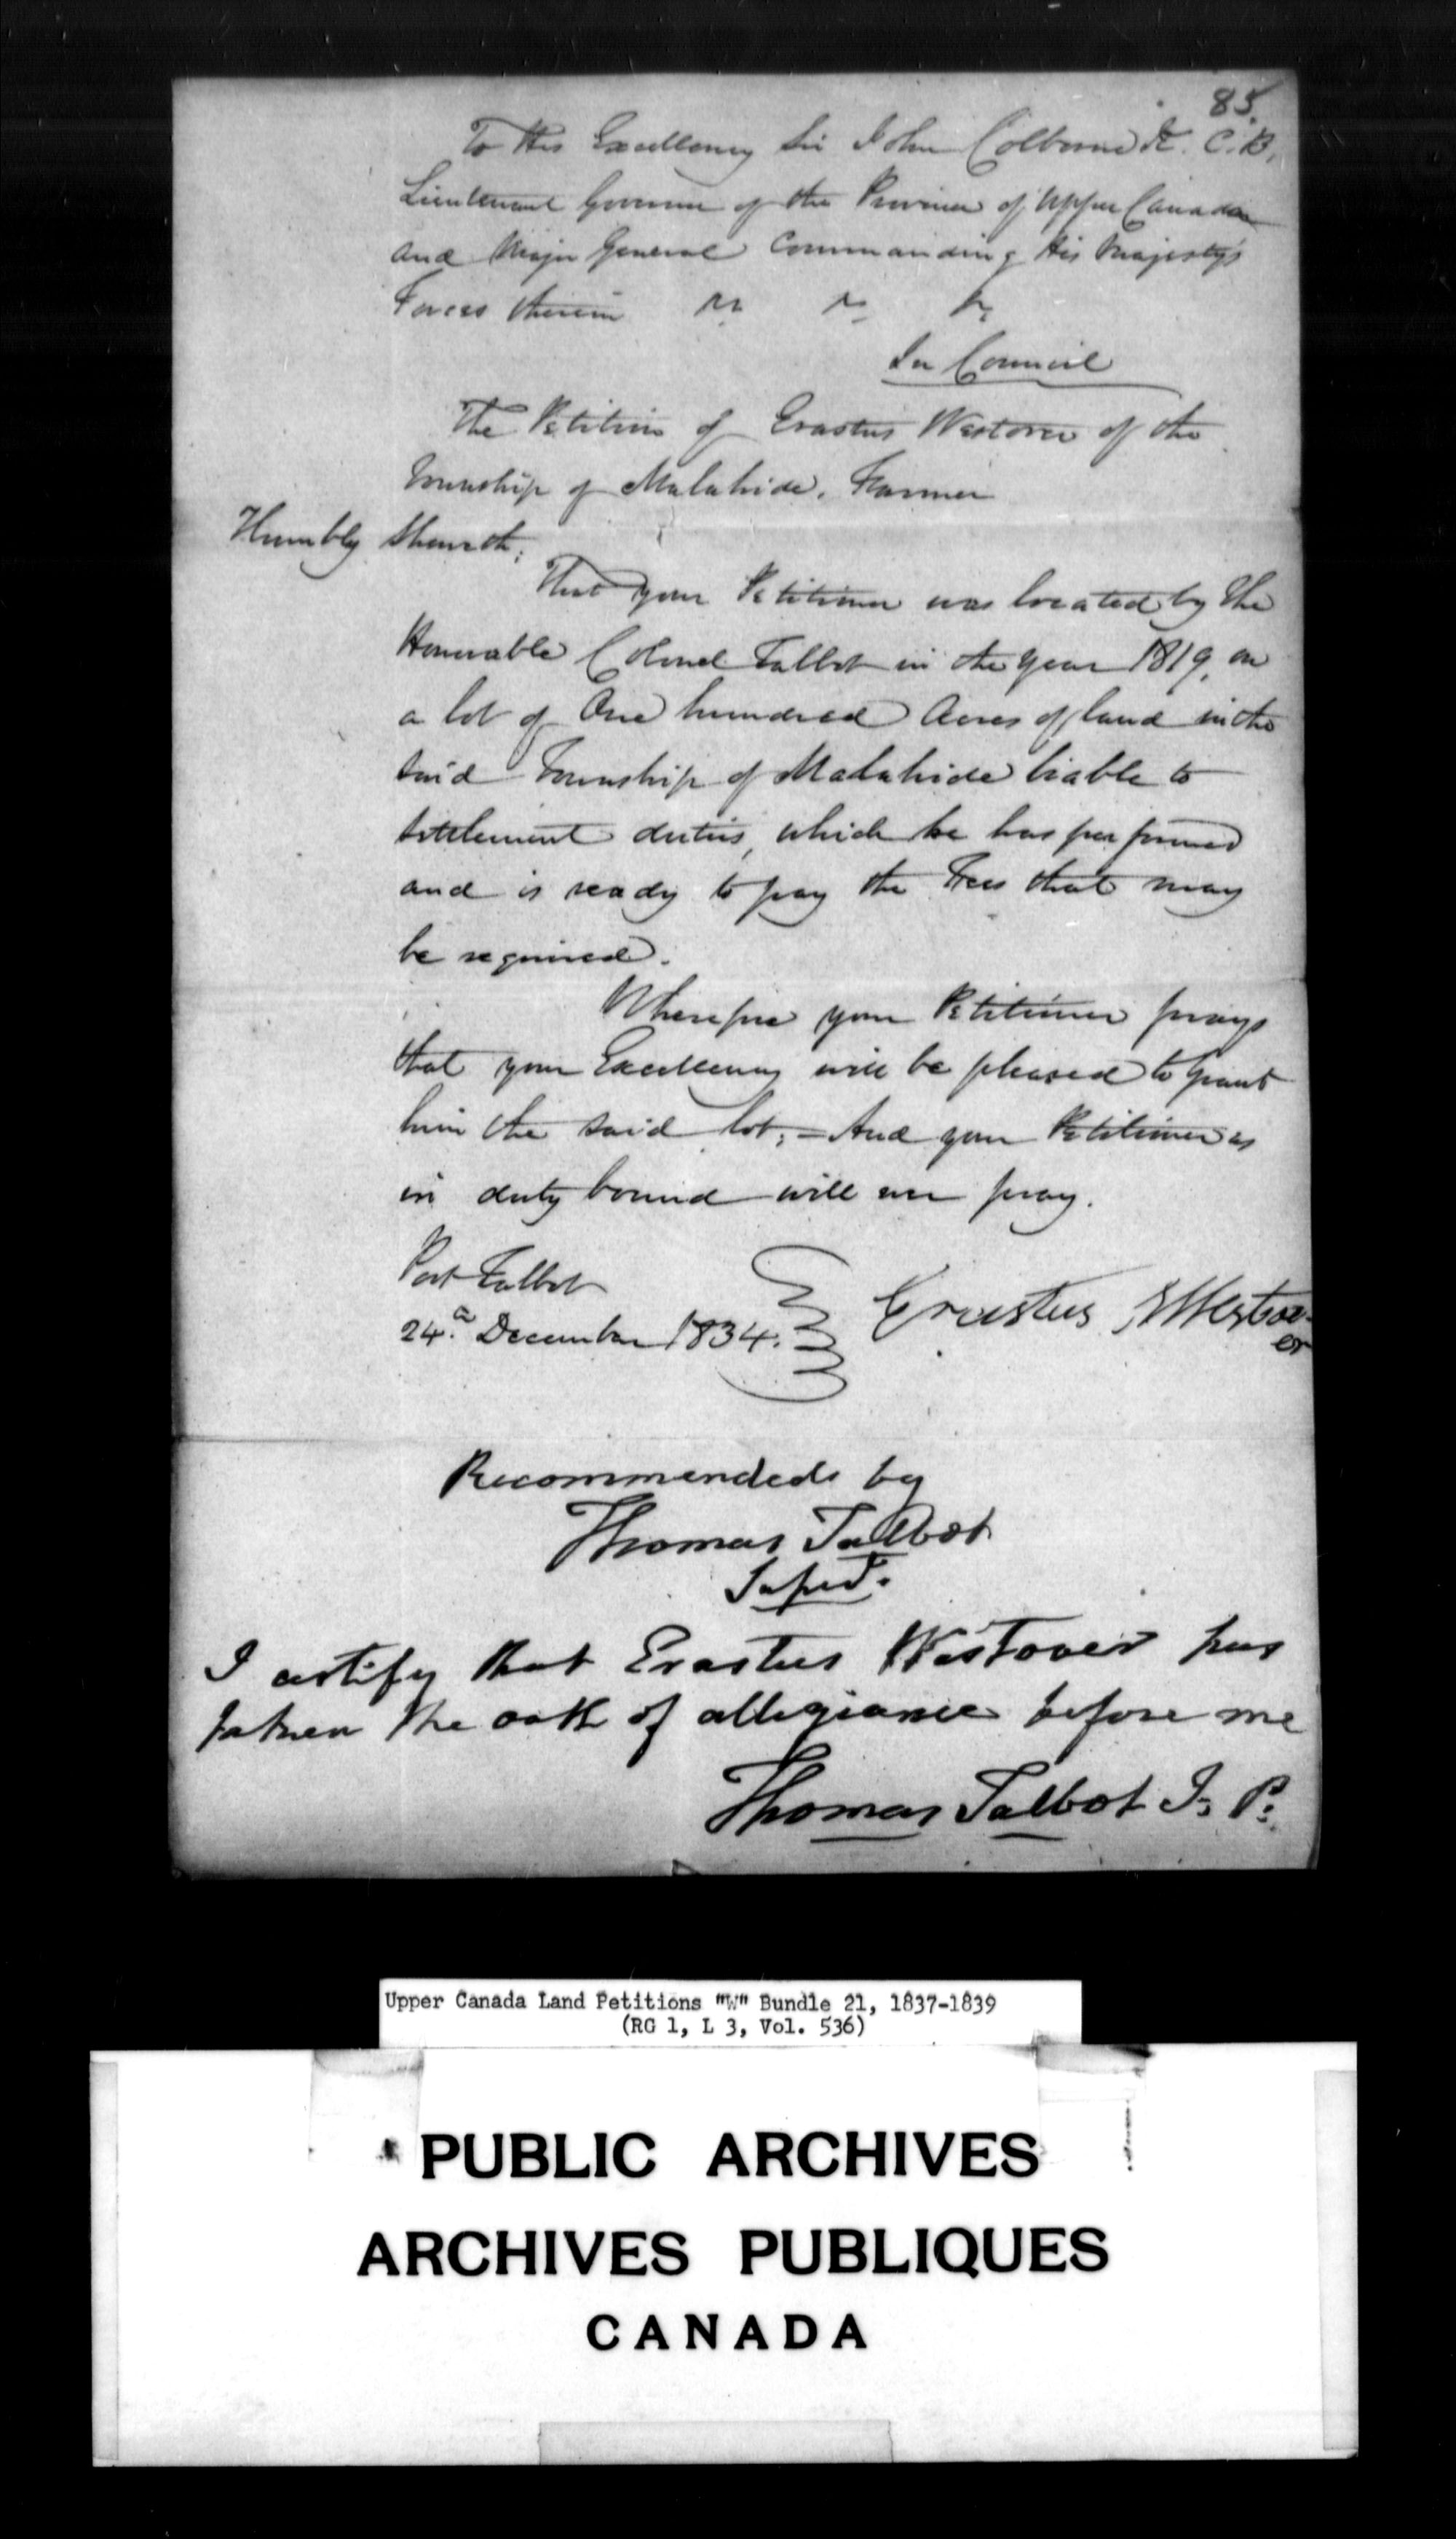 Title: Upper Canada Land Petitions (1763-1865) - Mikan Number: 205131 - Microform: c-2960